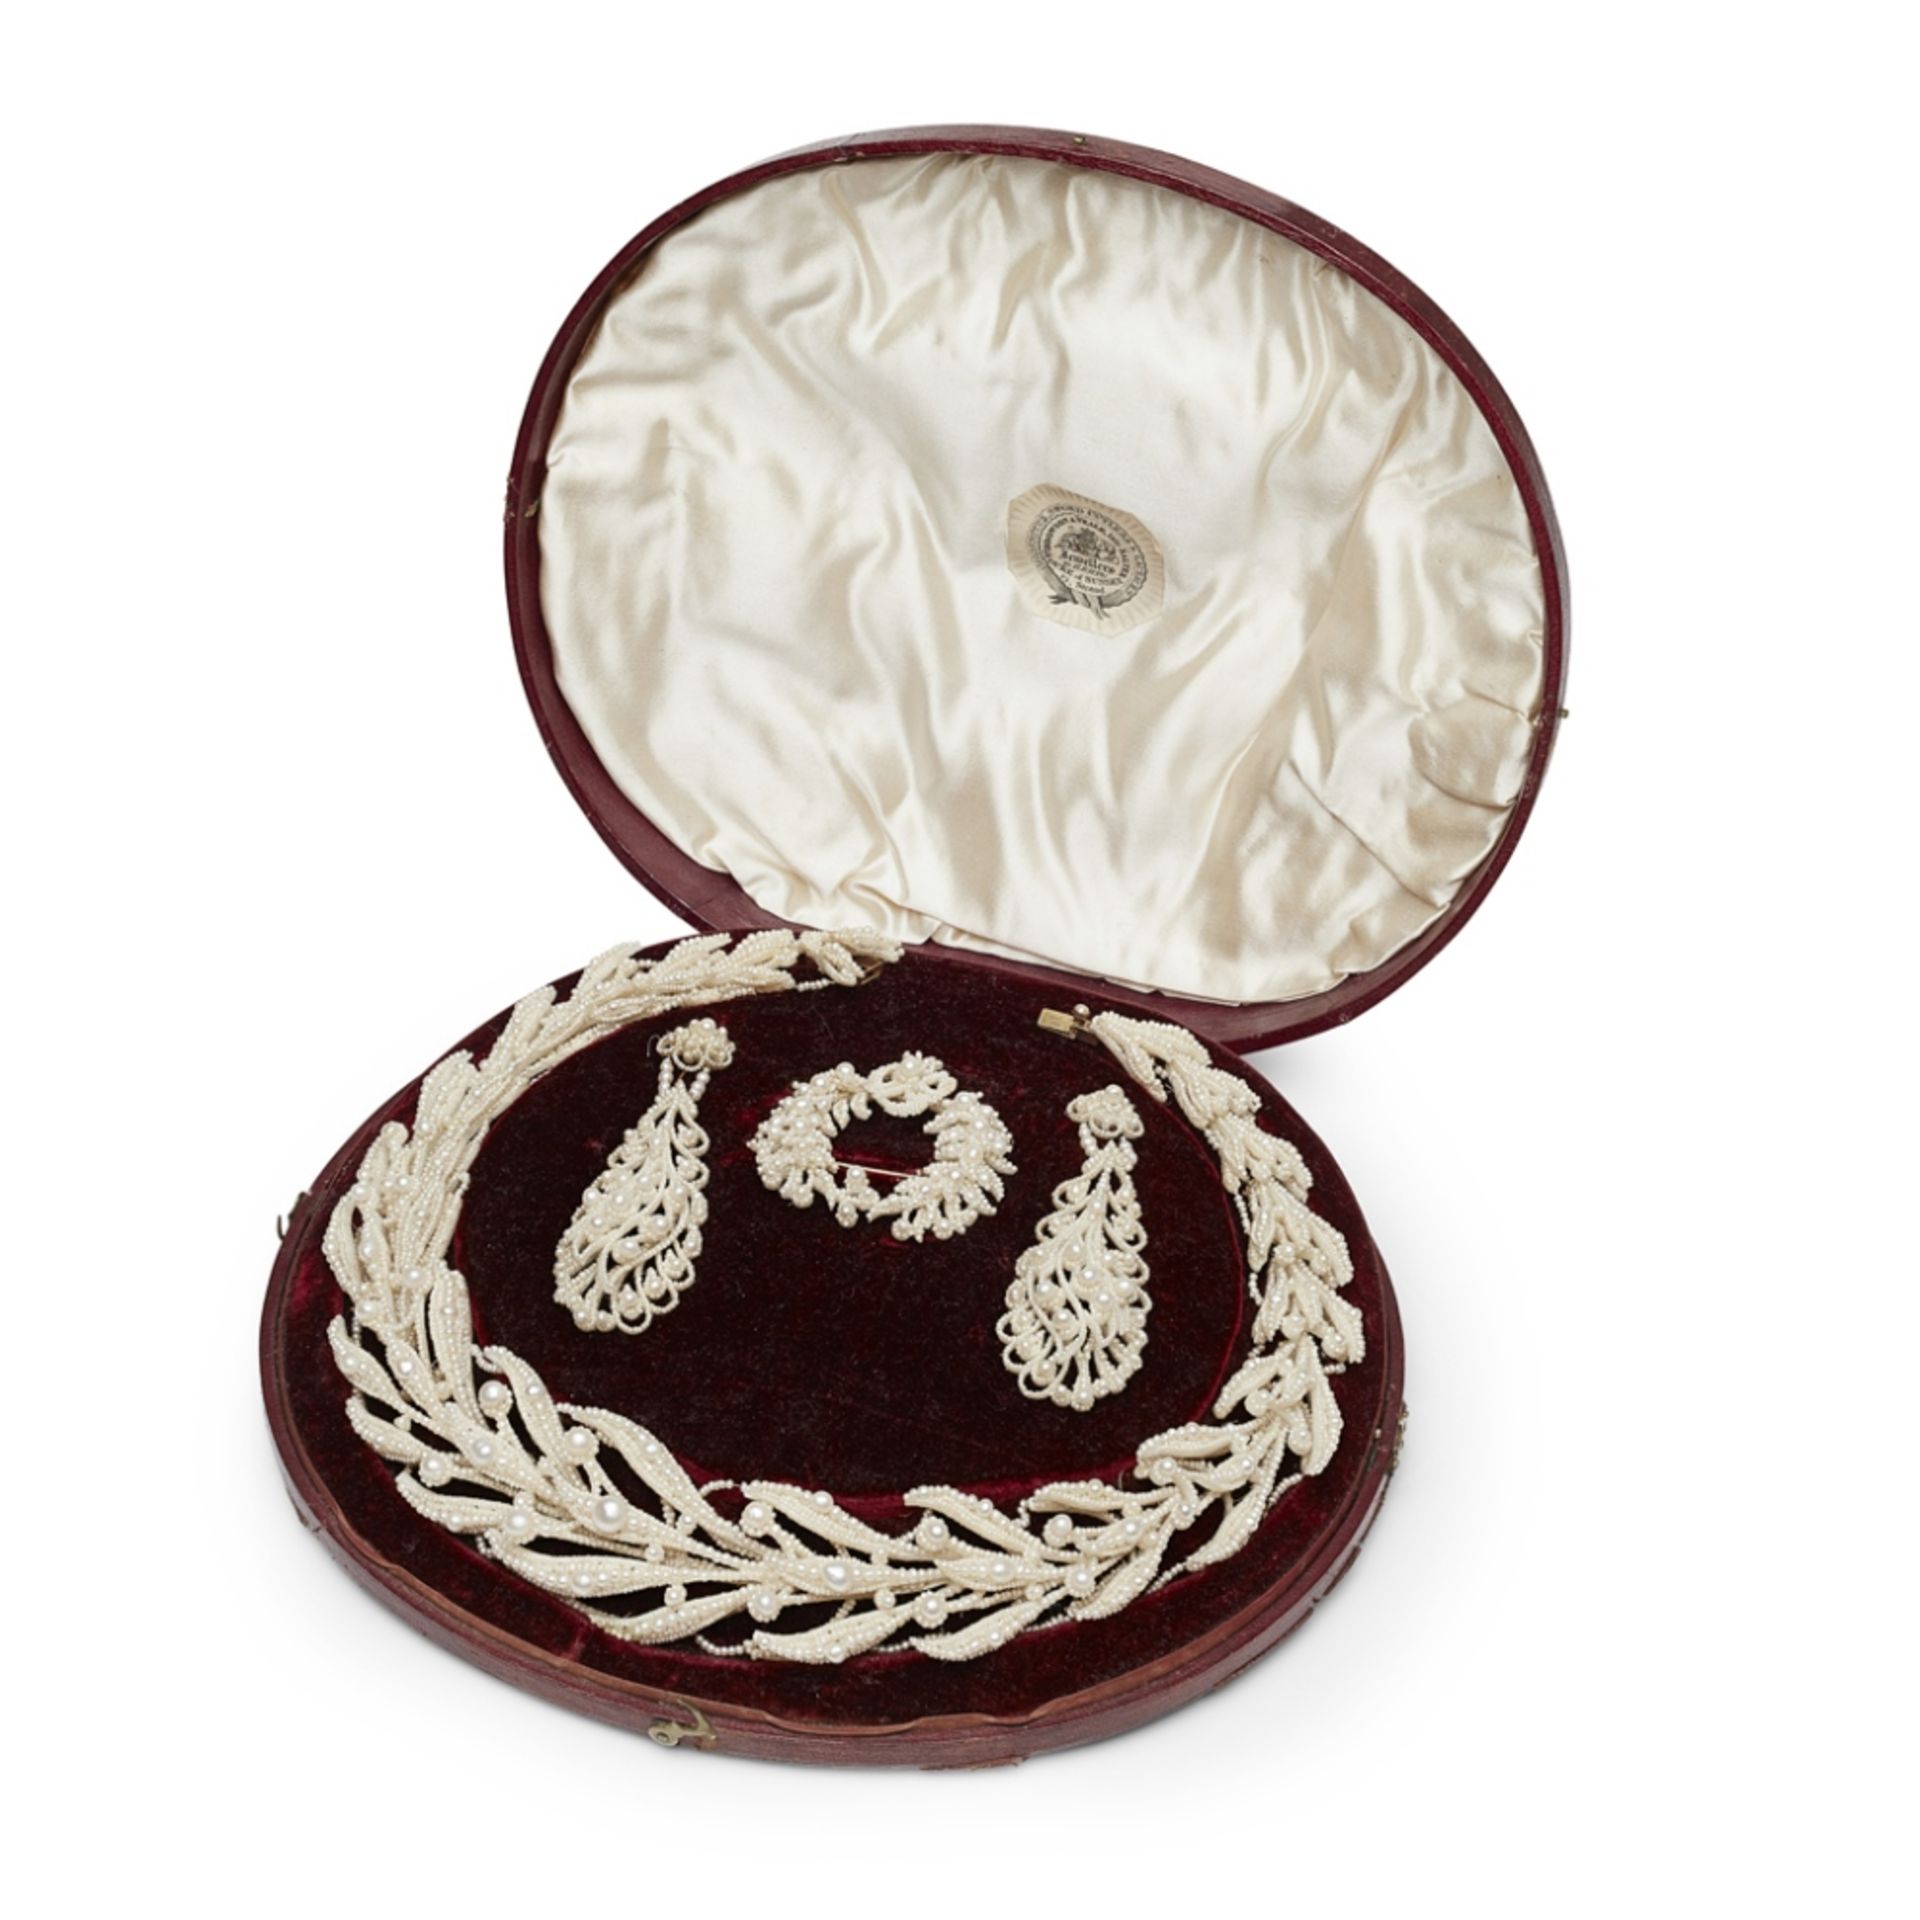 A Regency period seed-pearl parurecomprising a necklace in the form of a laurel wreath set